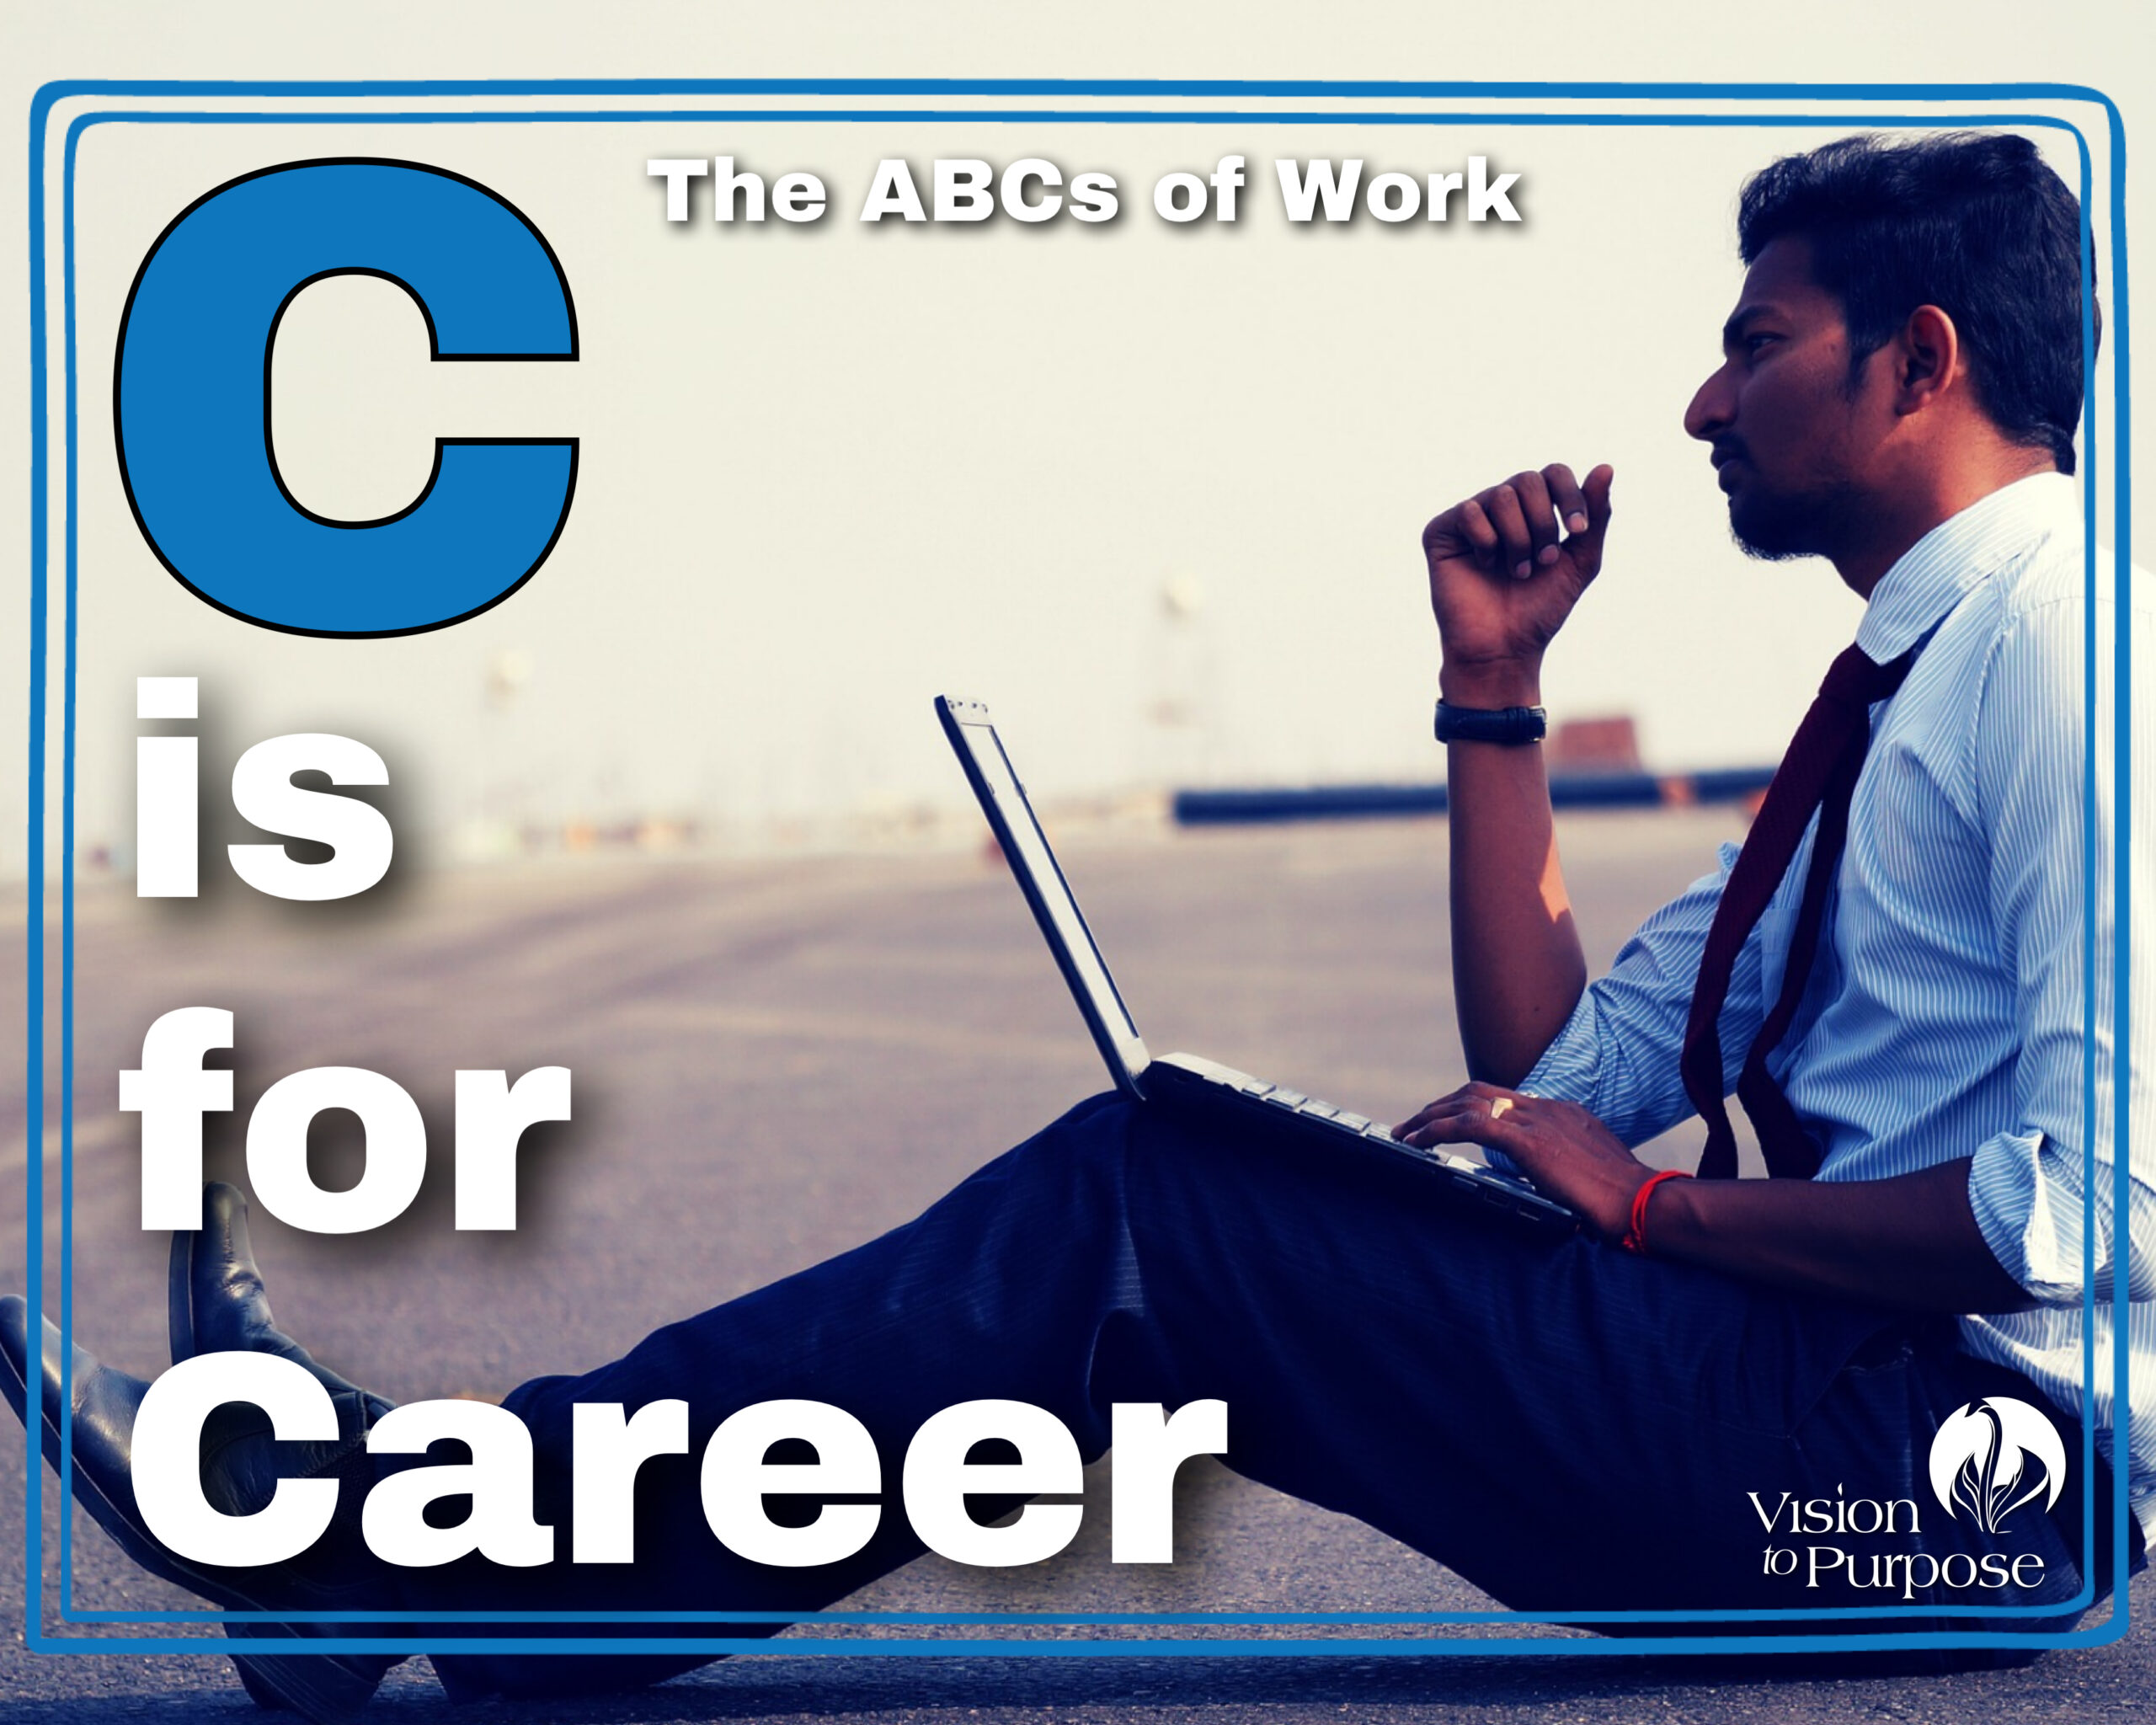 C is for Career